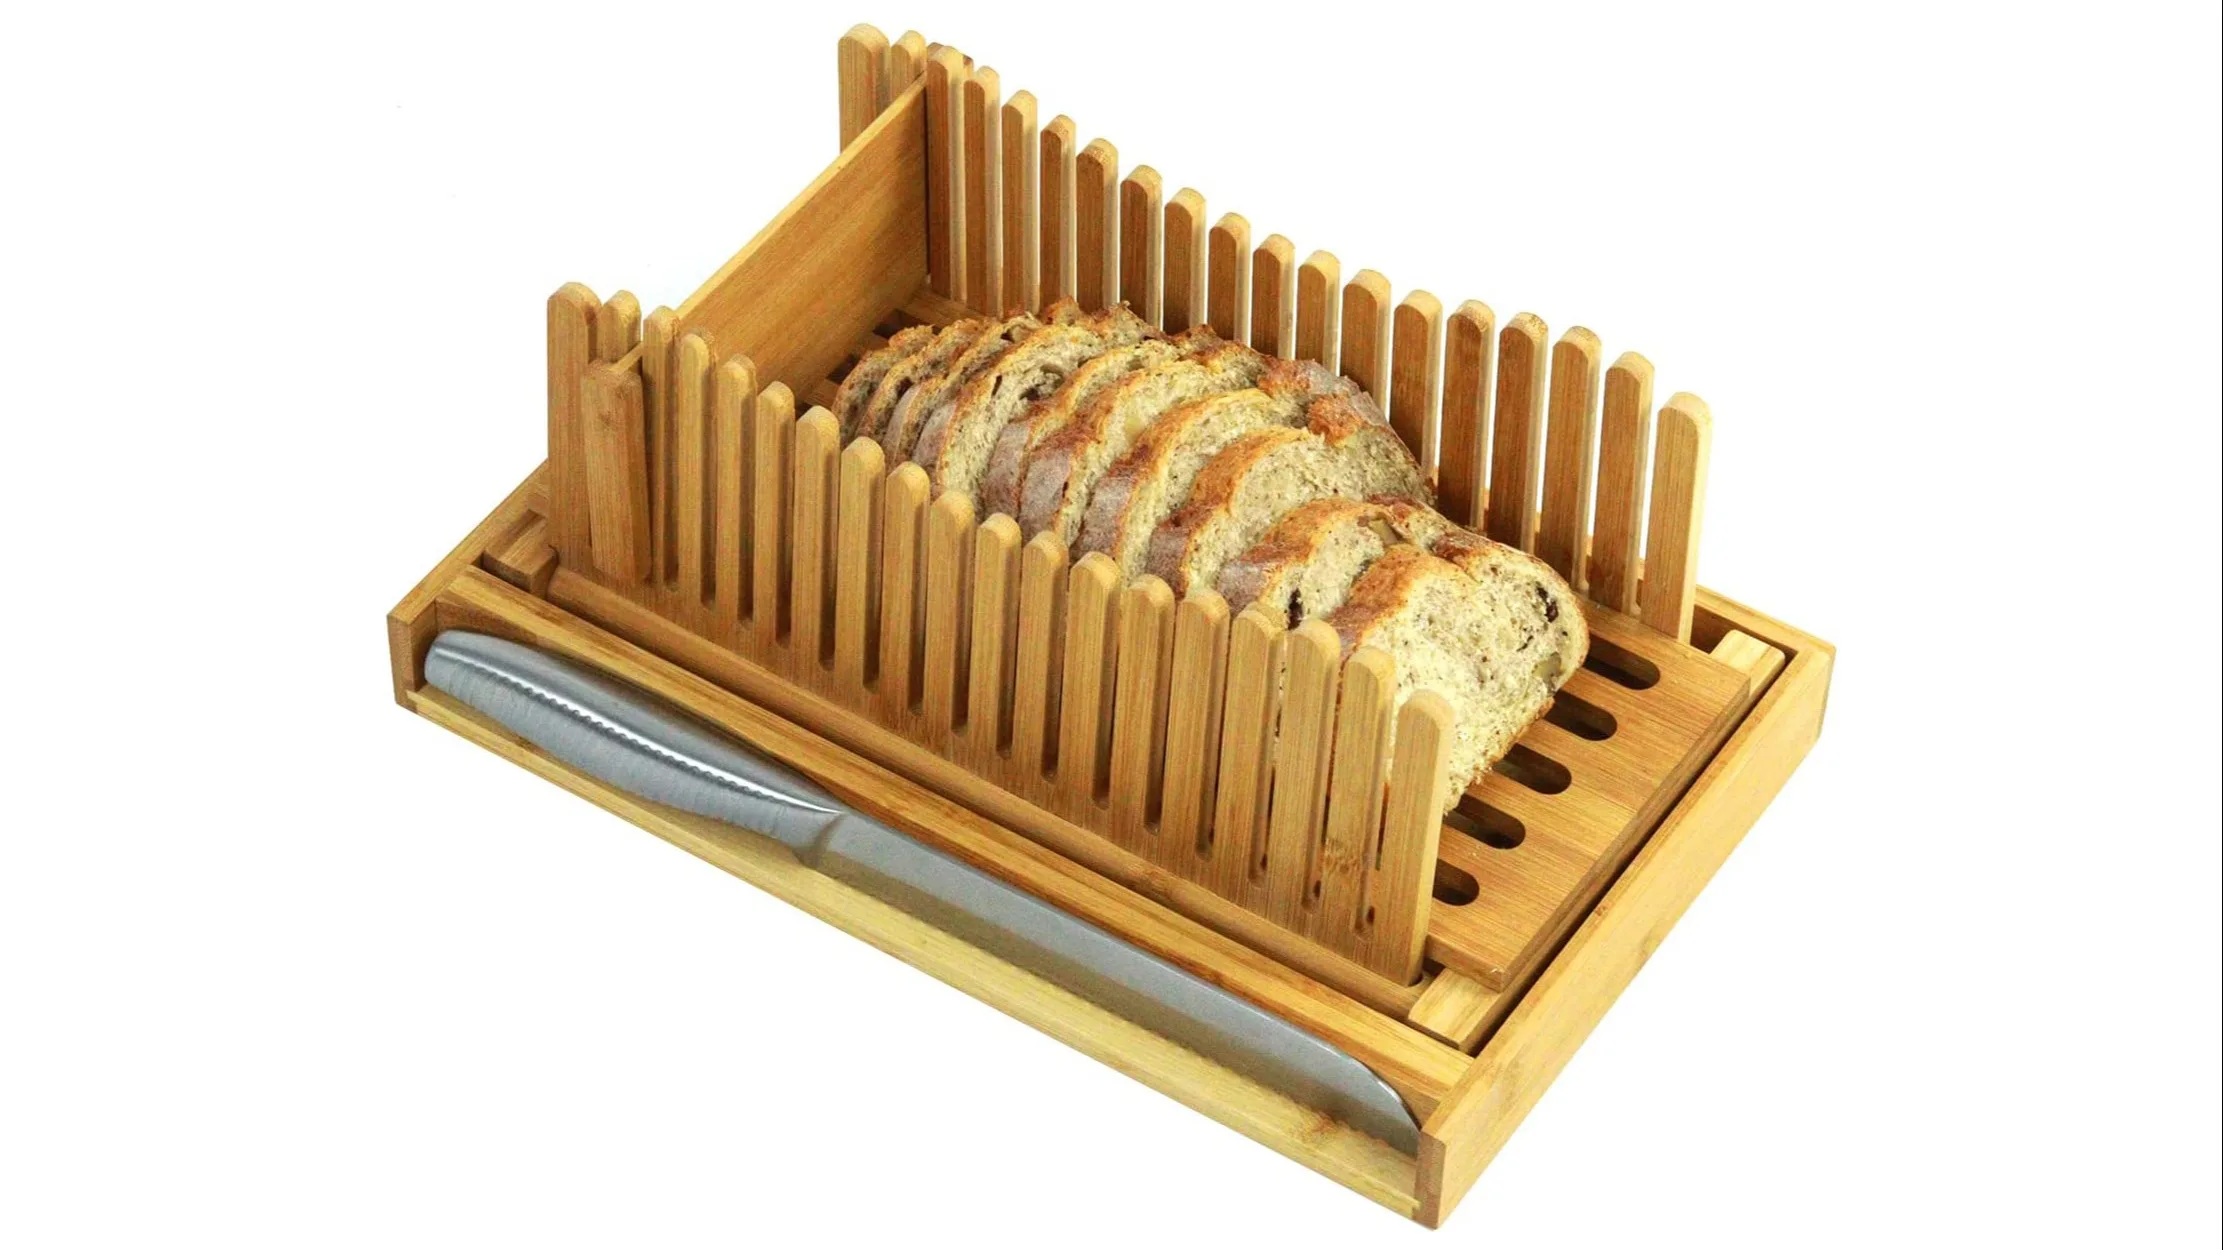 Bamboo Wood Compact Foldable Bread Slicer Loaf Cutting Board & Adjustable Bread Slicing Guide with Crumb Catcher Tray for Homemade or Bought Bread Cakes Bread Slicer Machine #ZDMBQPJ 